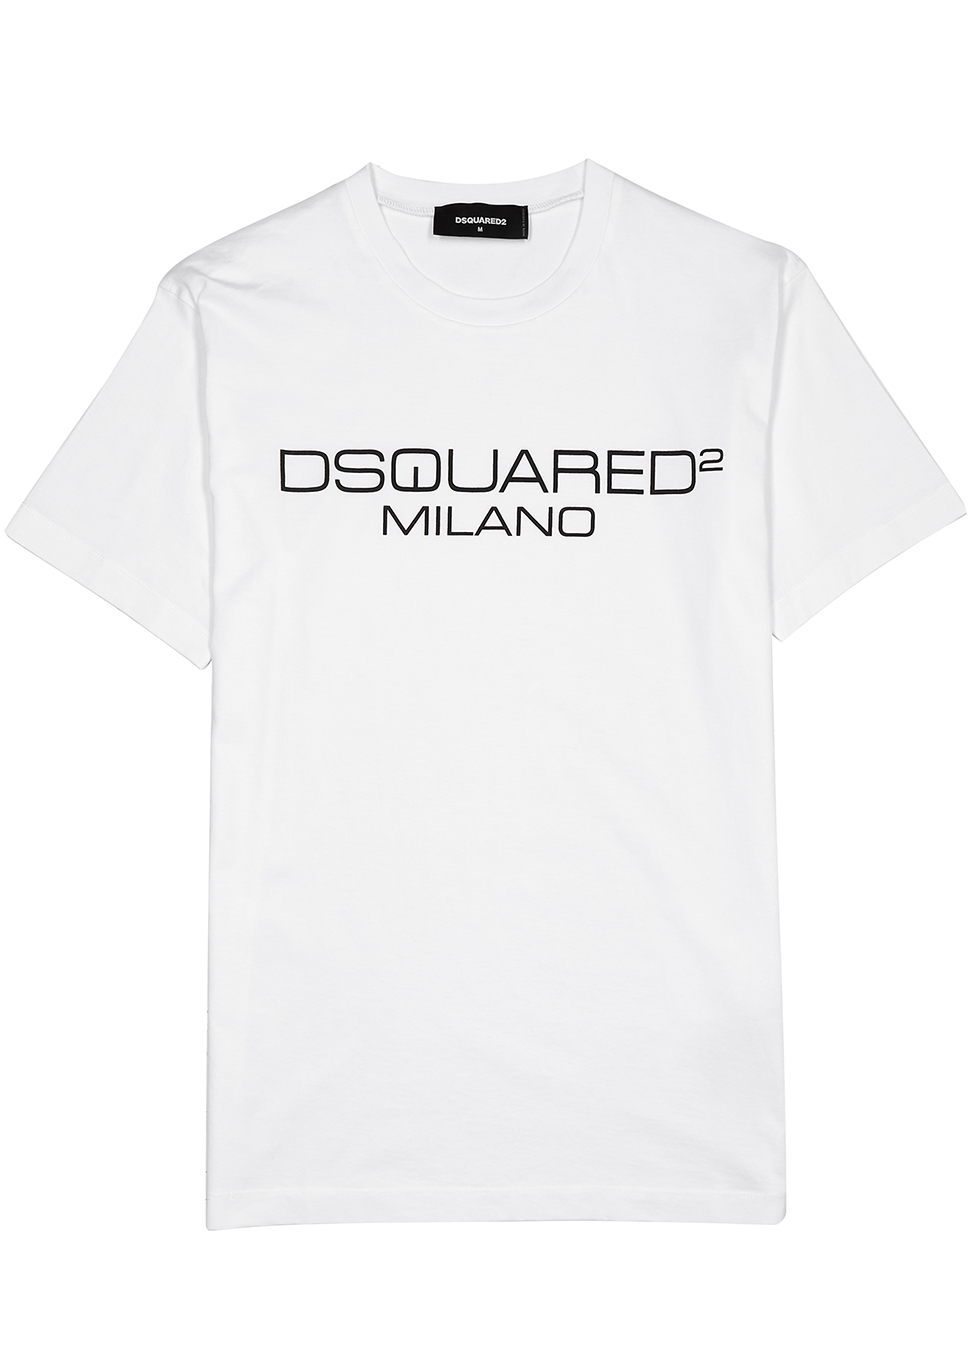 dsquared shirts online